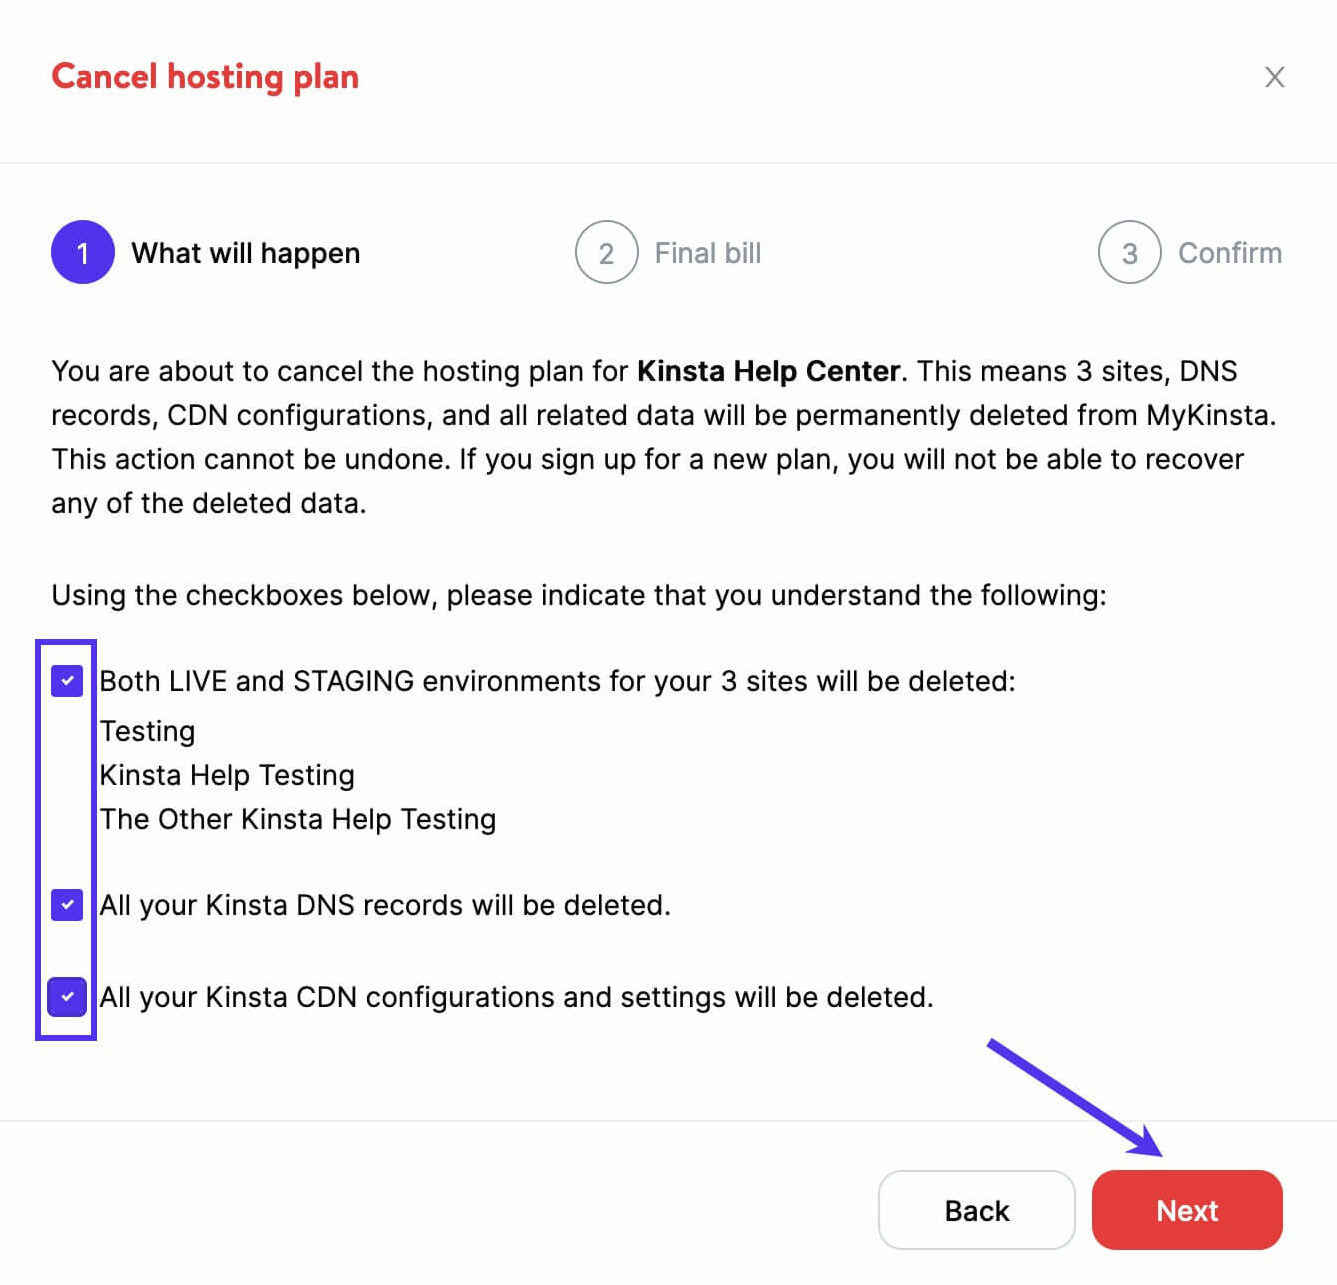 Cancel the hosting plan and acknowledge all data will be deleted.